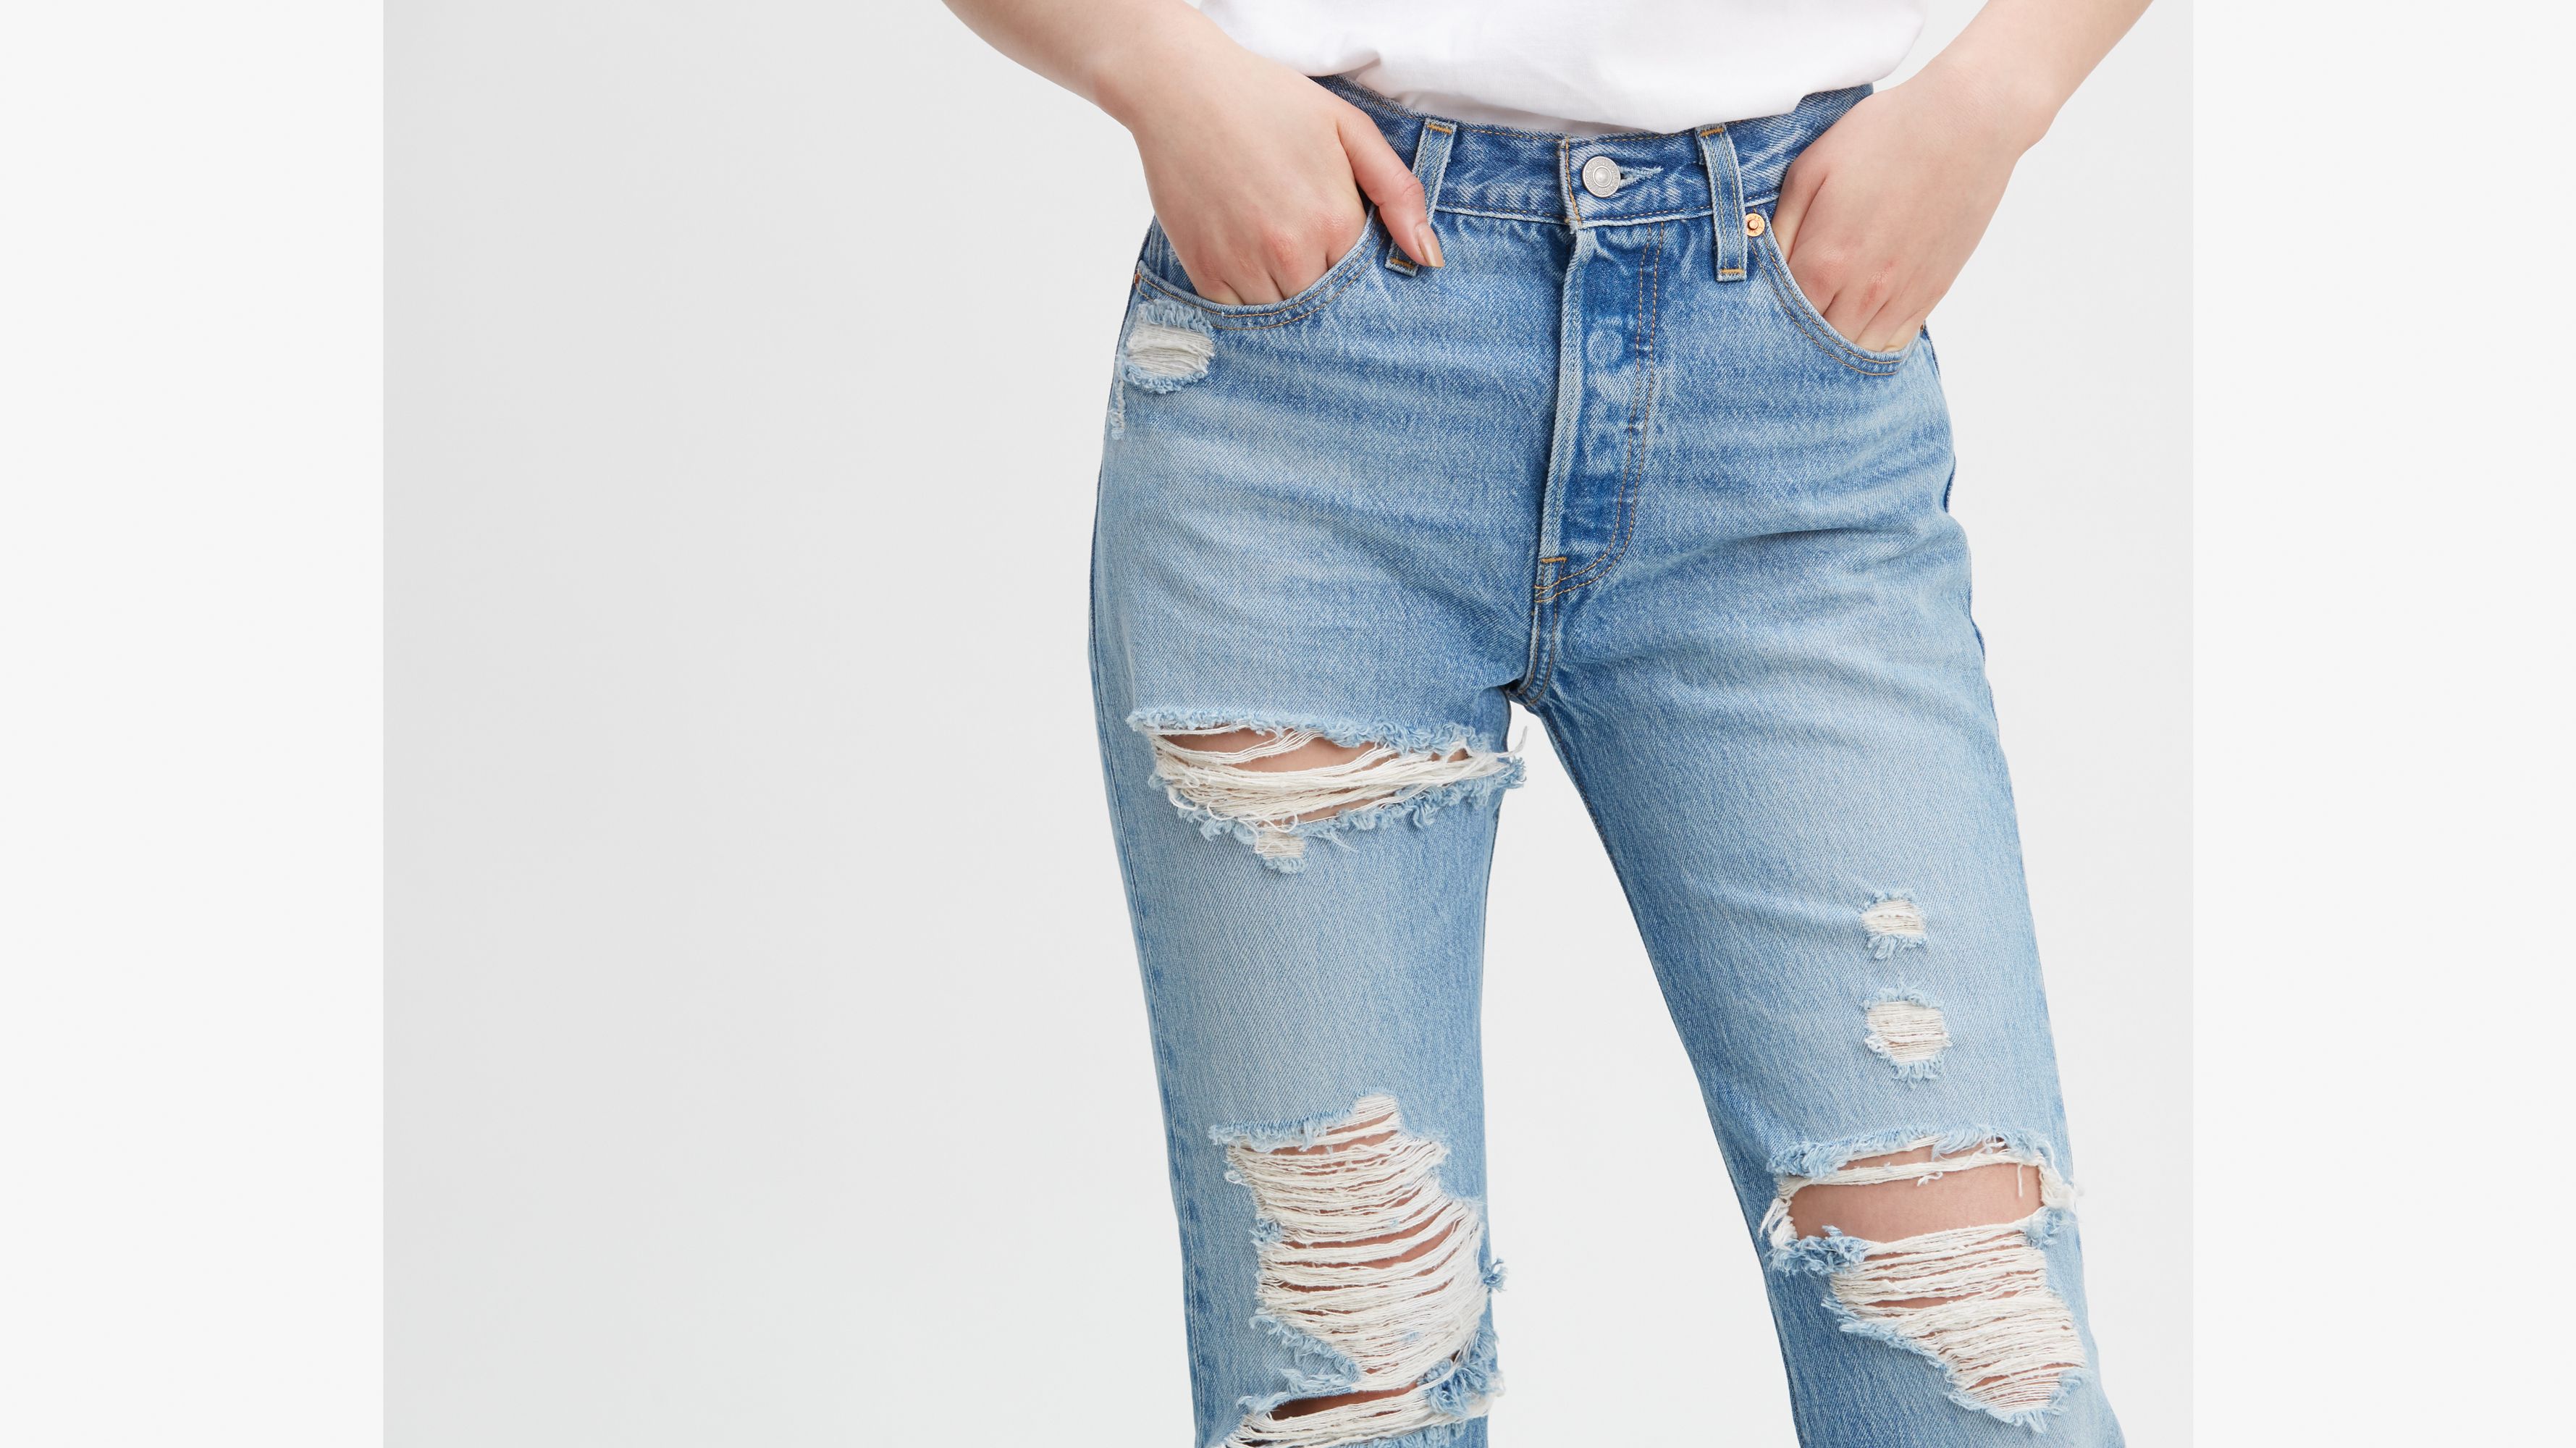 courtney norcross add levis ripped jeans photo